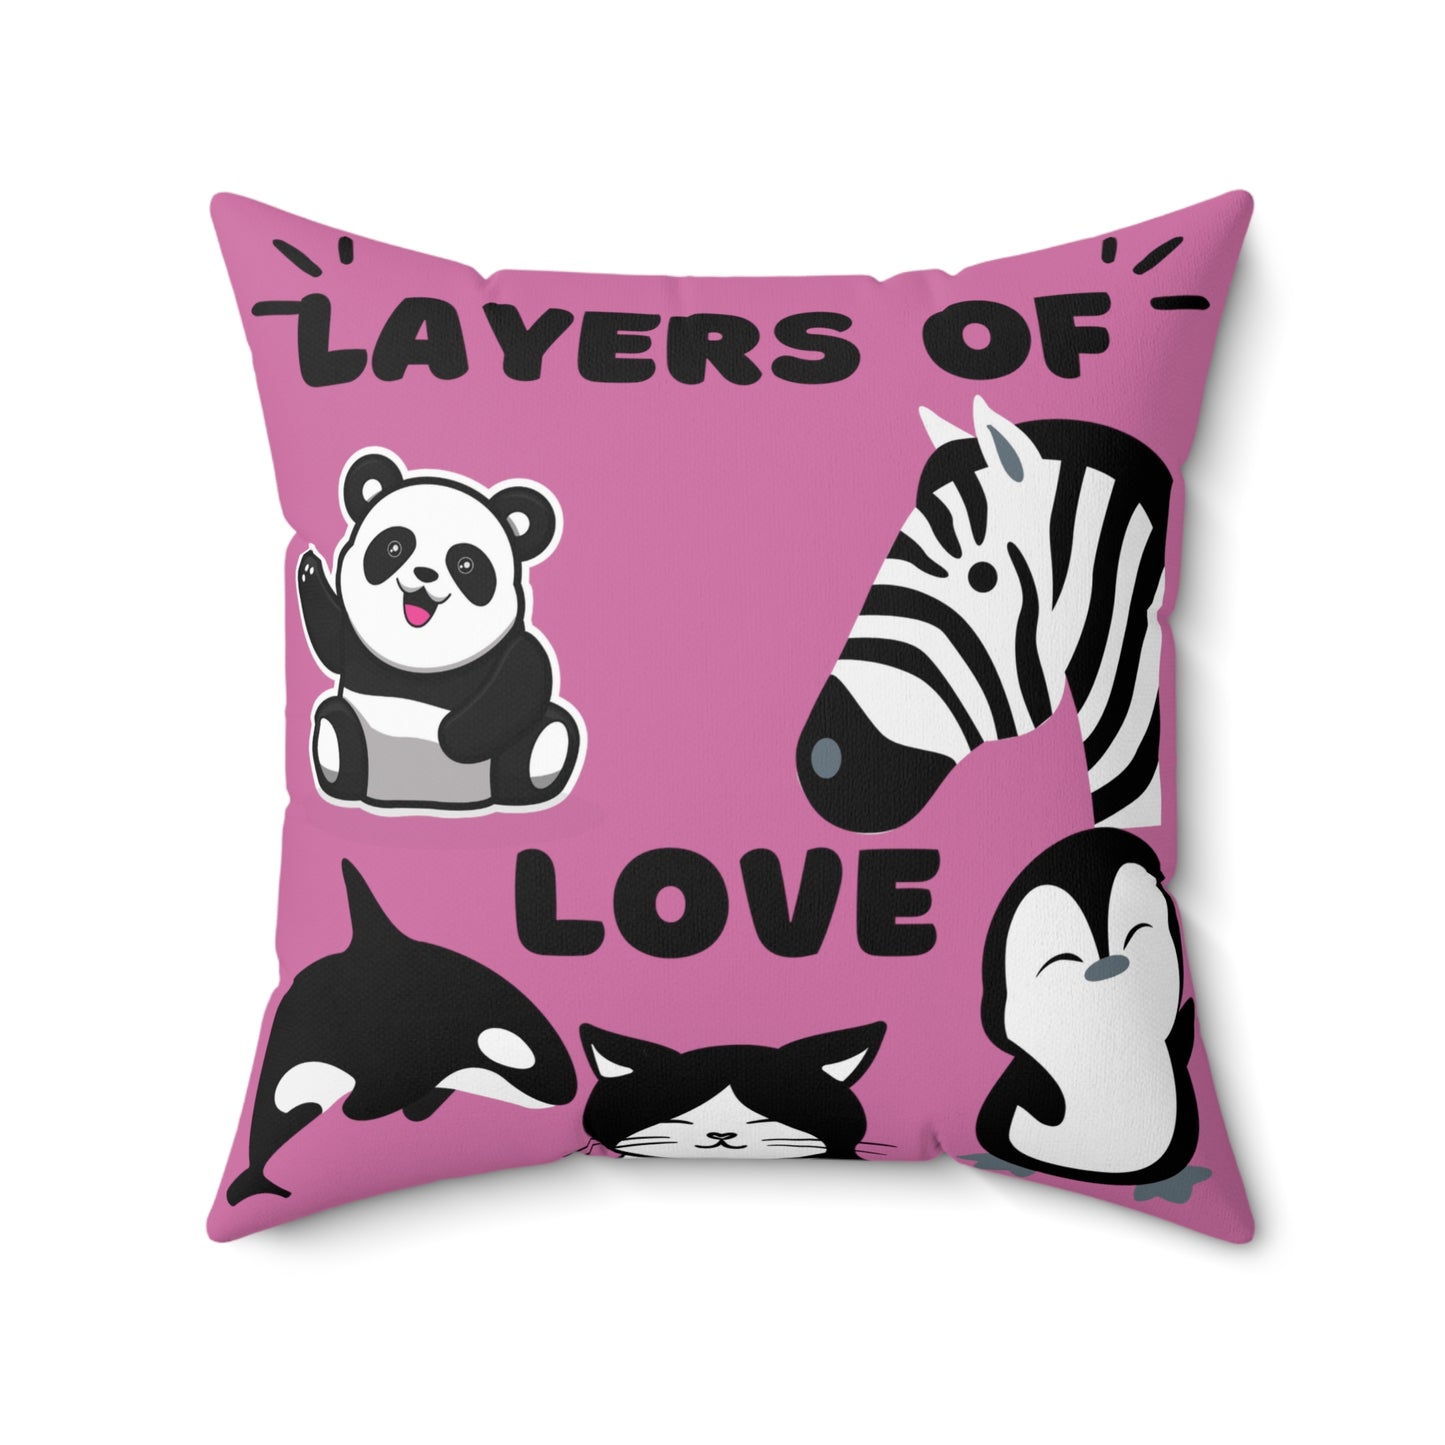 Layers of Love Spun Polyester Square Pillow